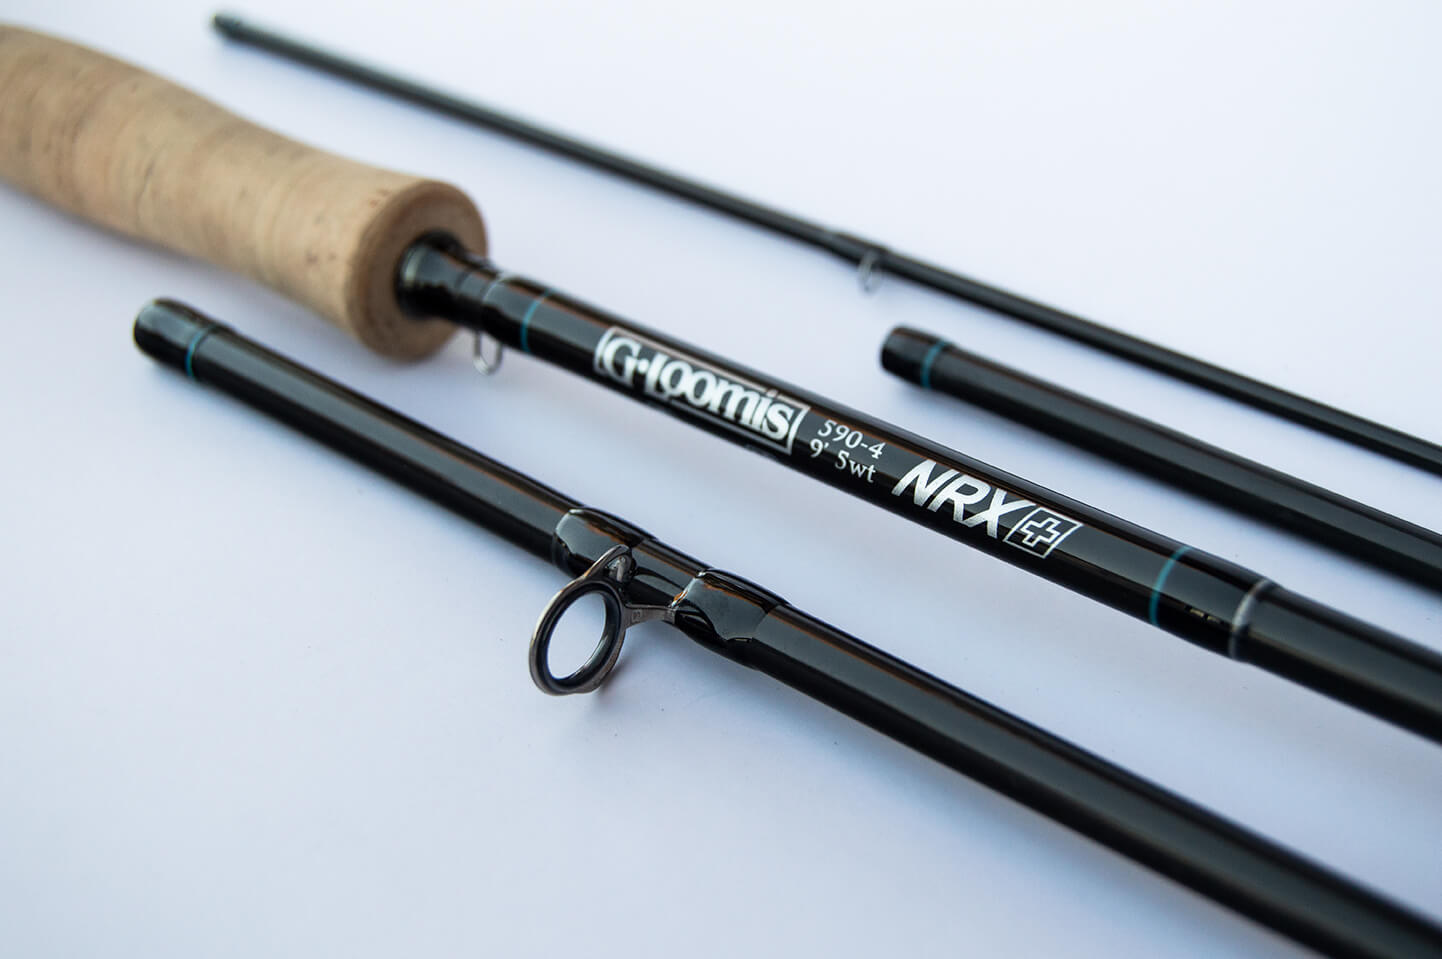 G.Loomis Fly Rods at Telluride Angler - Asquith, NRX, NRX LP, IMX Pro